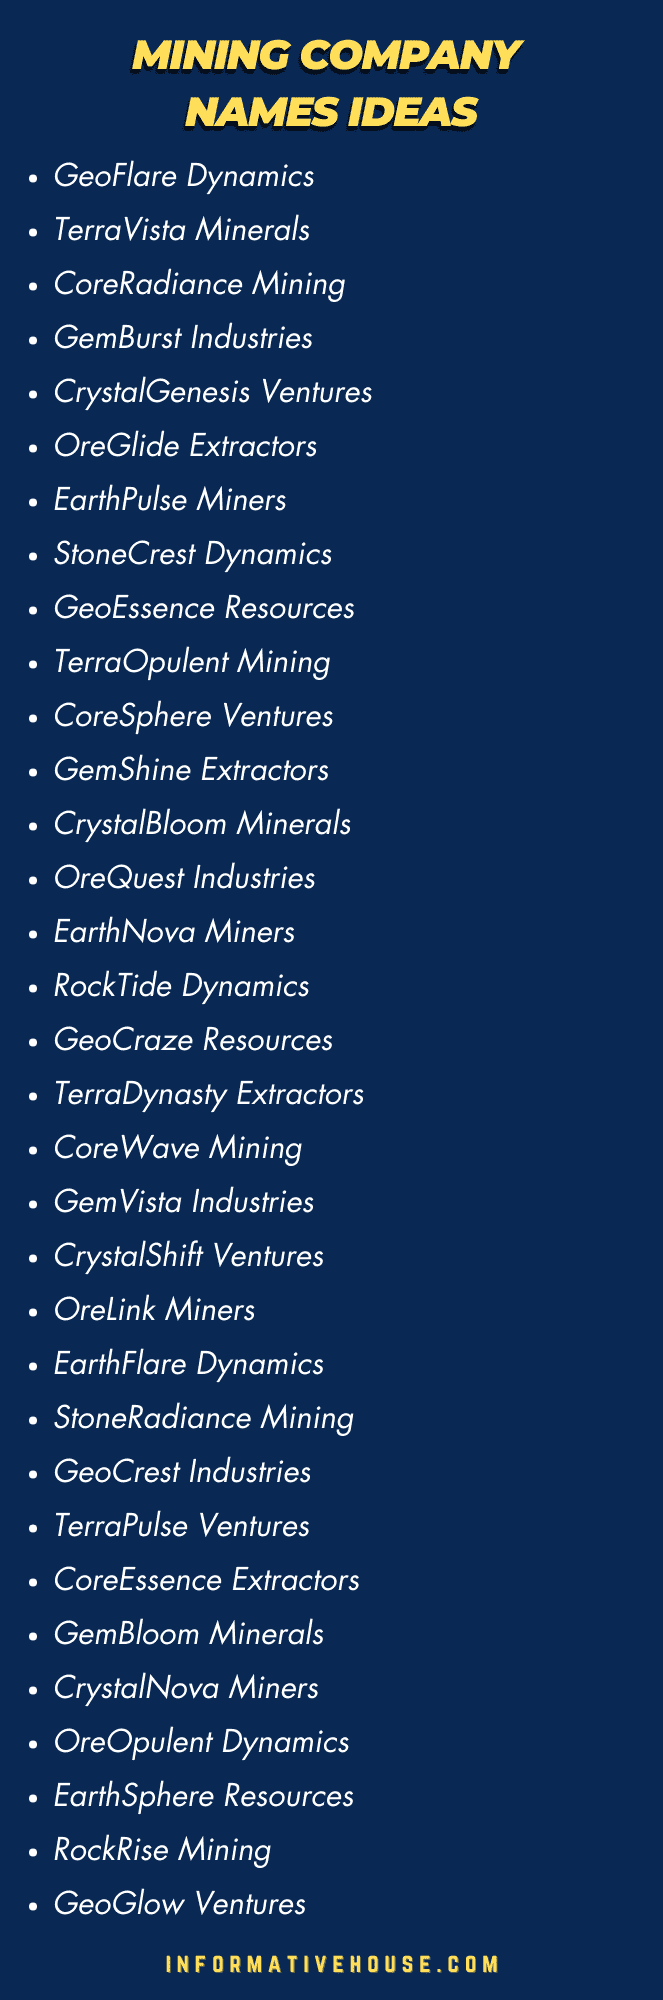 Top 50 Mining Company Names Ideas for mining business startup